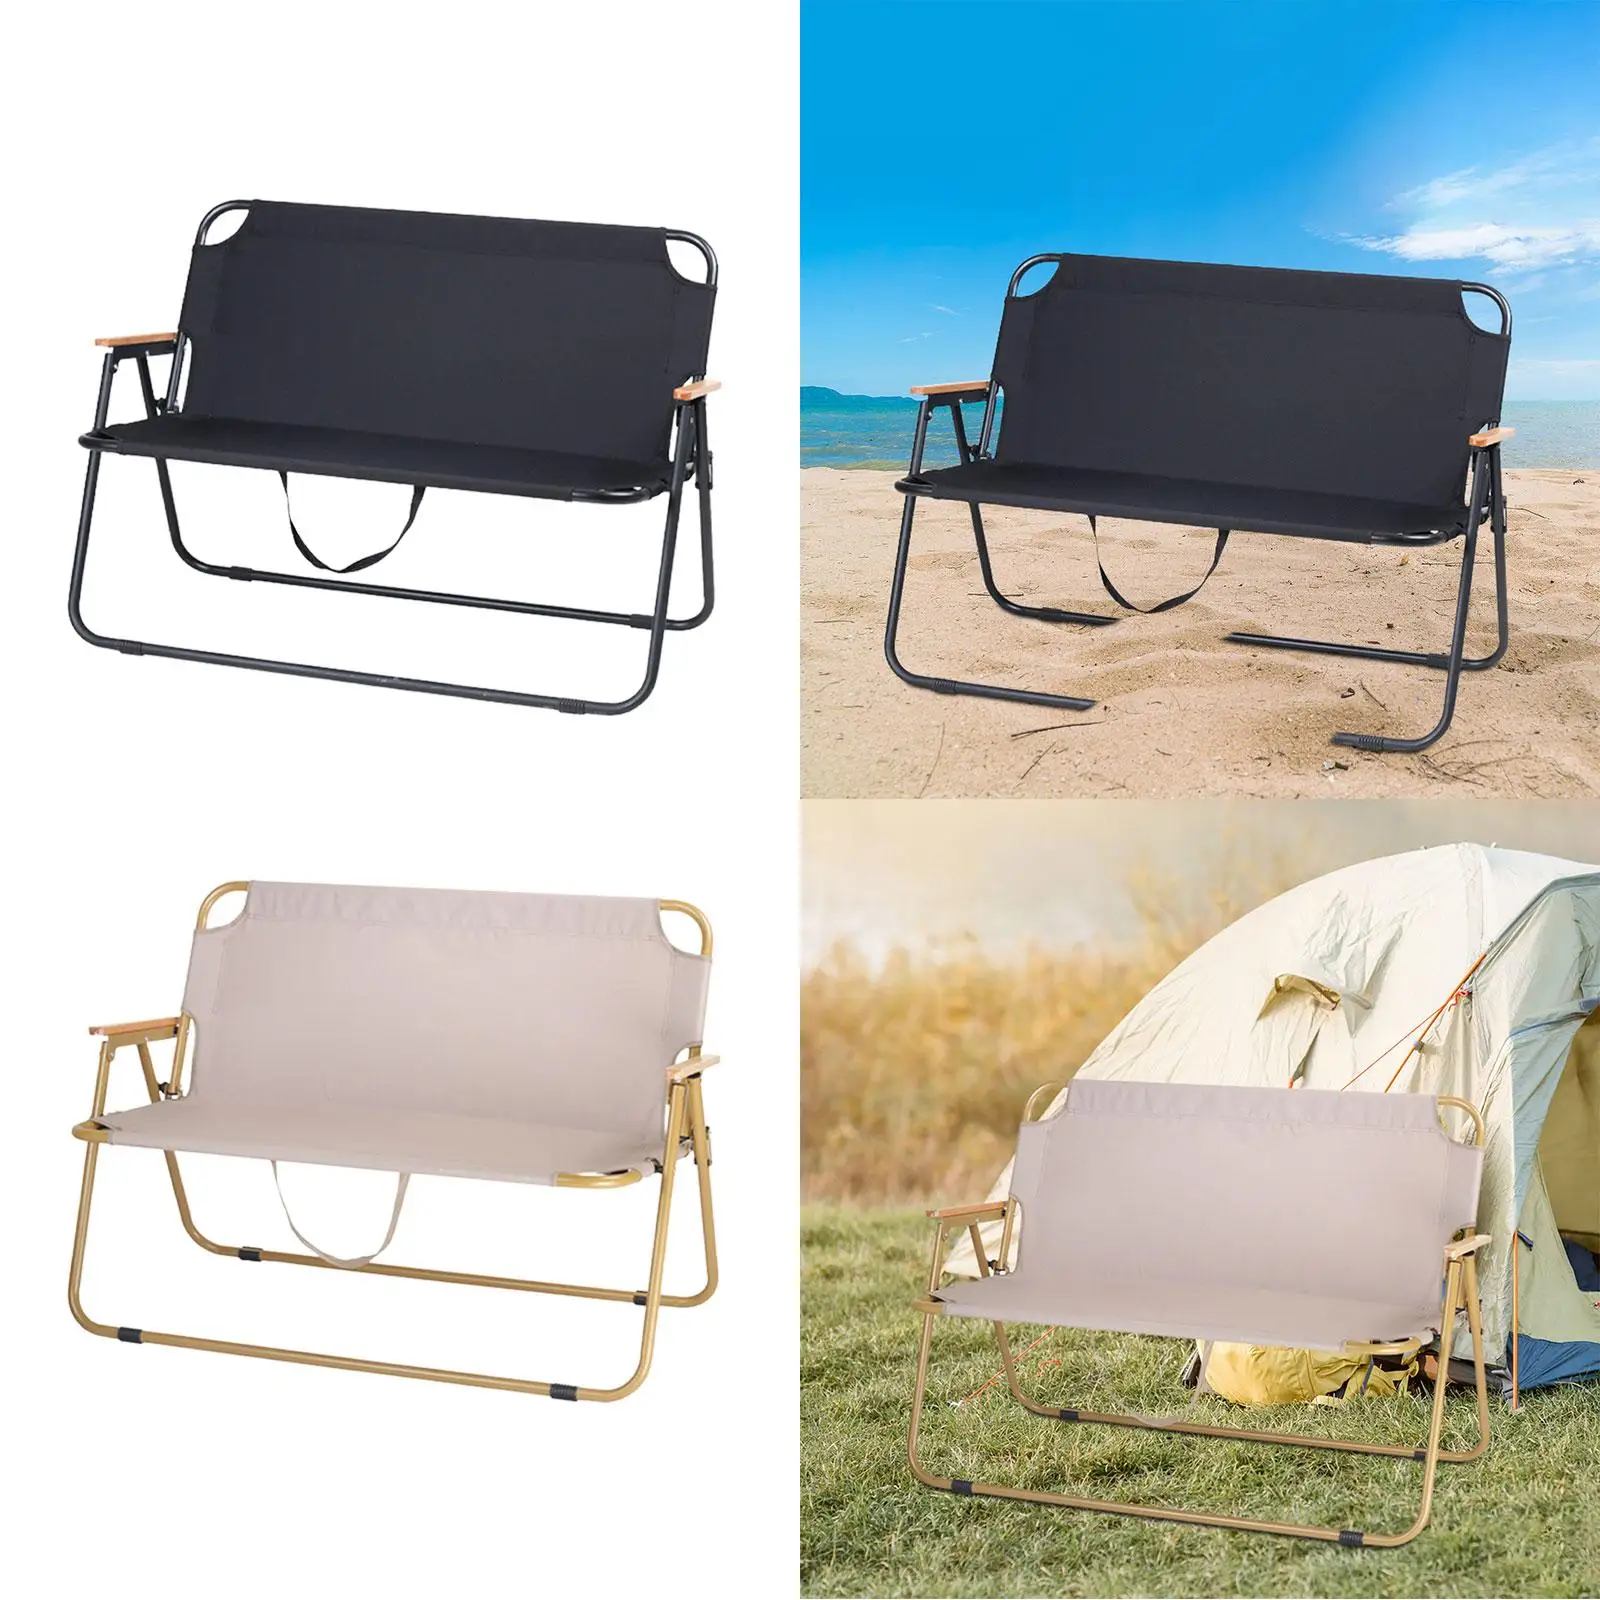 Folding Camping Chair Fishing Traveling Camping Seat Backpacking Outside Patio Adult Outdoor Beach Chair Camp Chair Armchair